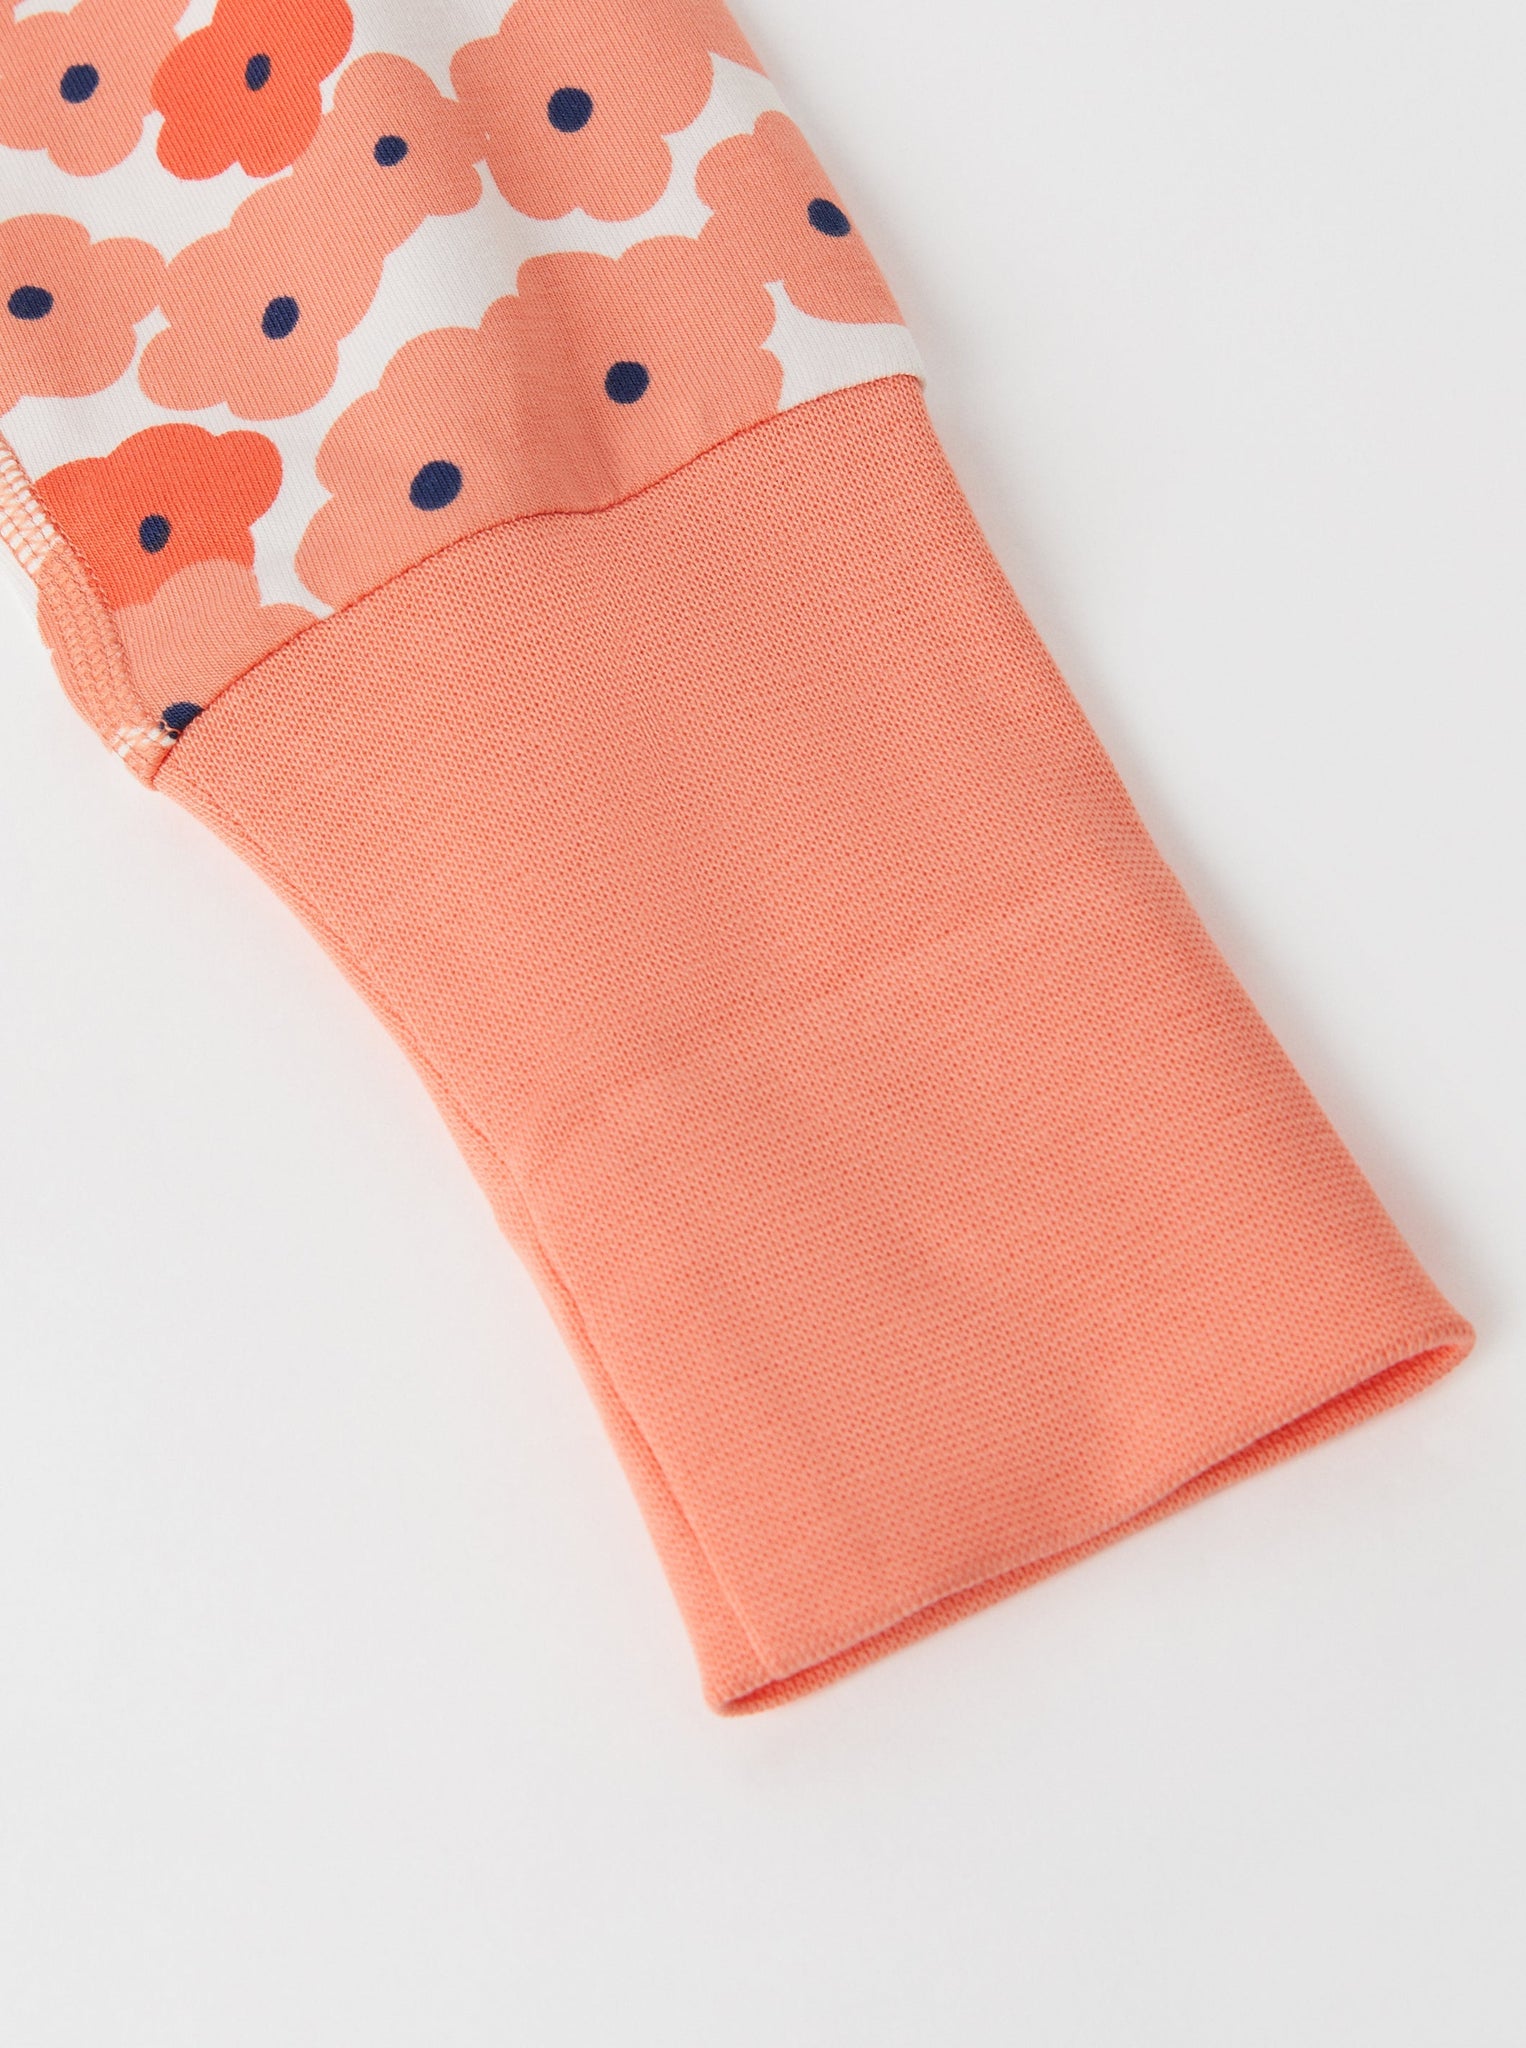 Orange Floral Print Kids Nightdress from the Polarn O. Pyret kidswear collection. The best ethical kids clothes